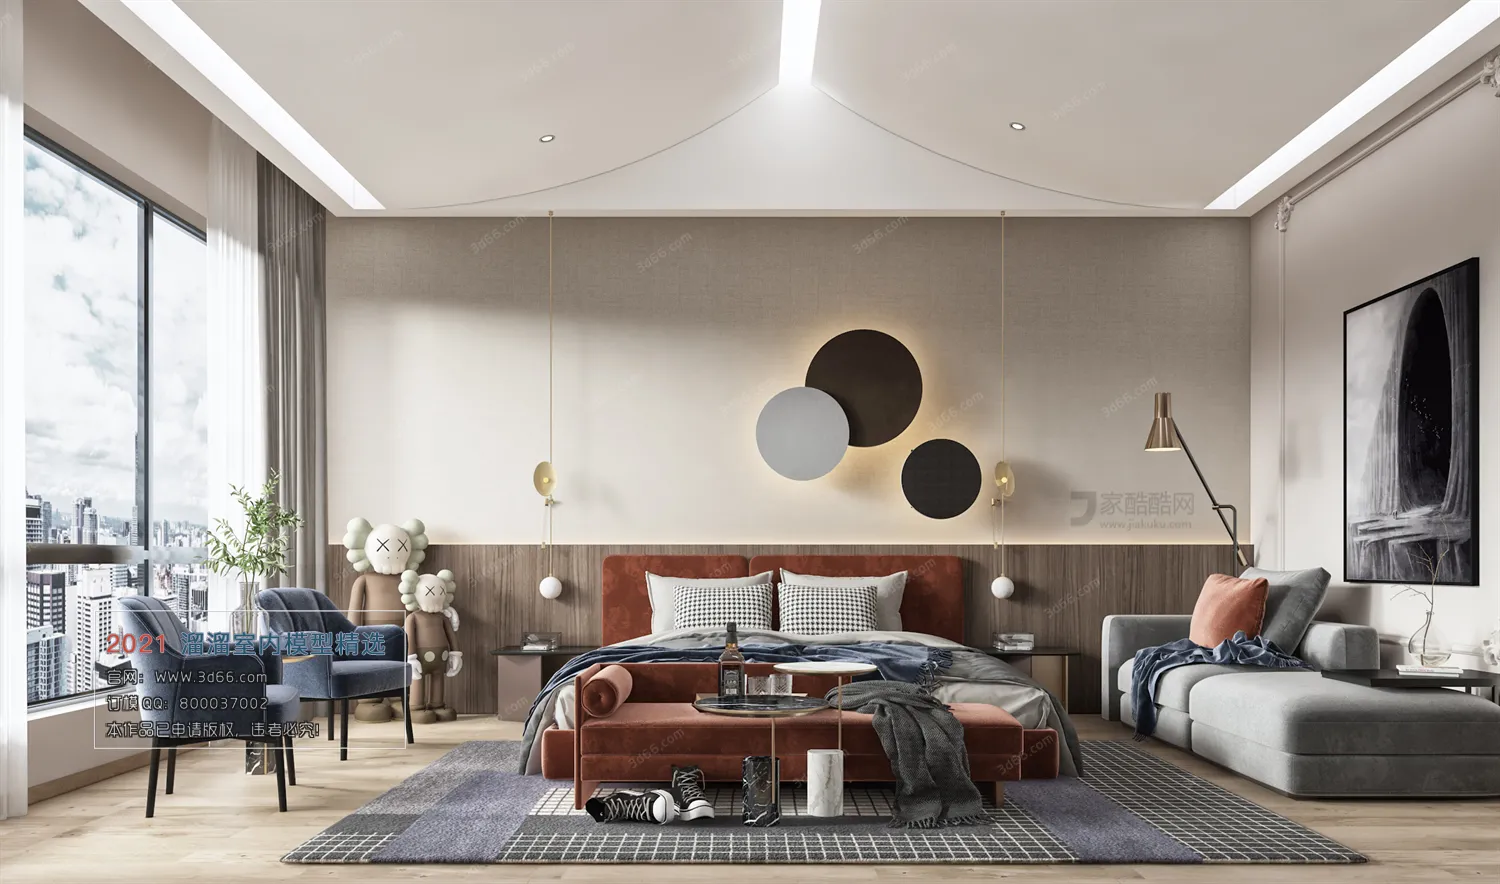 BEDROOM – A016-Modern style-Vray model